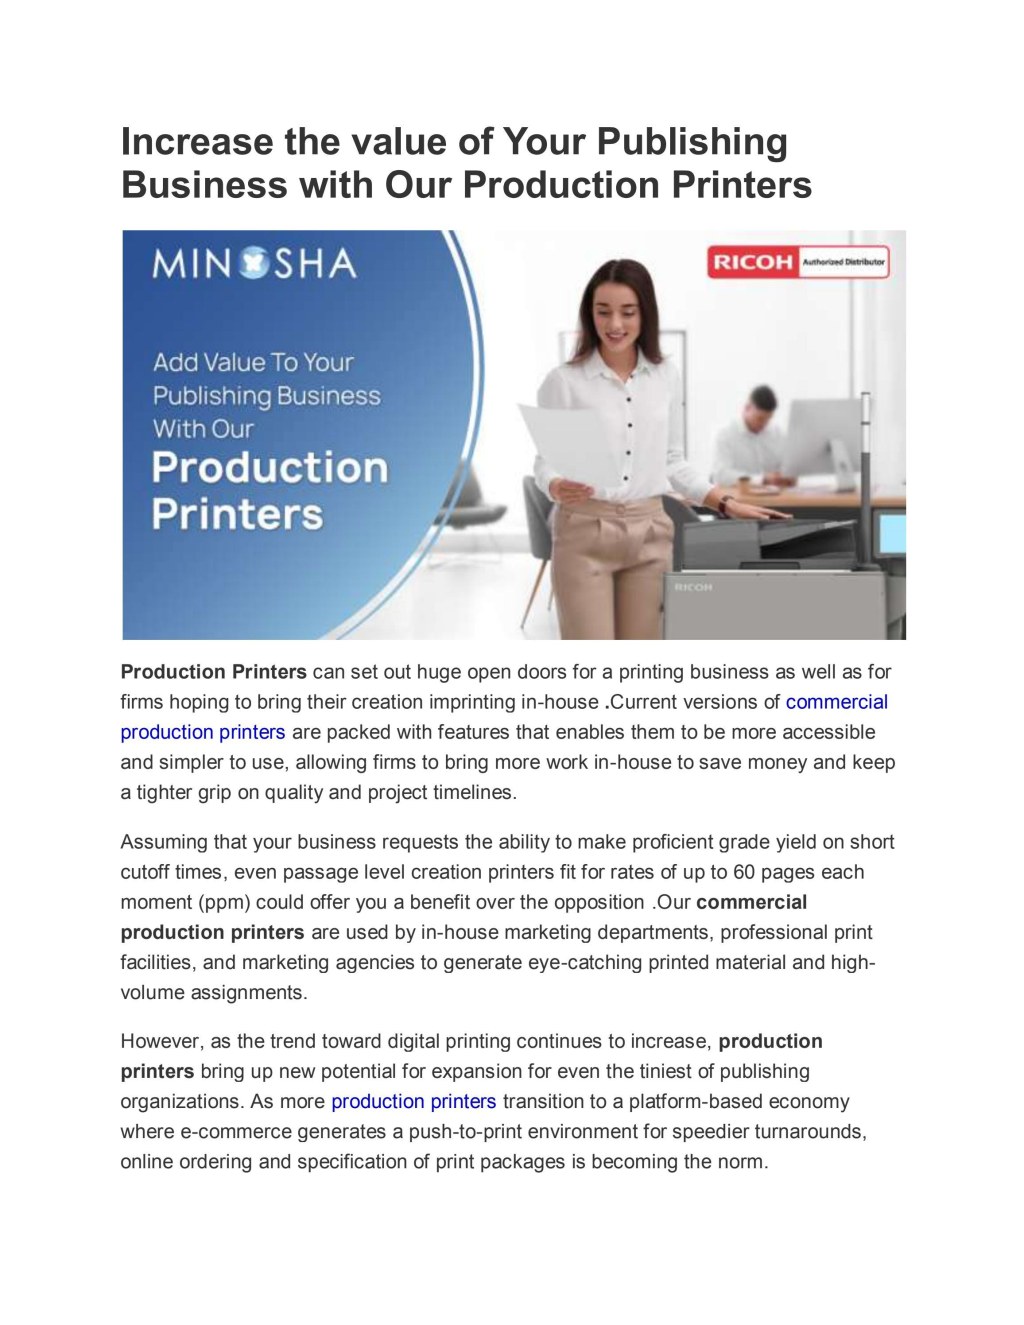 Picture of: Increase the value of Your Publishing Business with Our Production